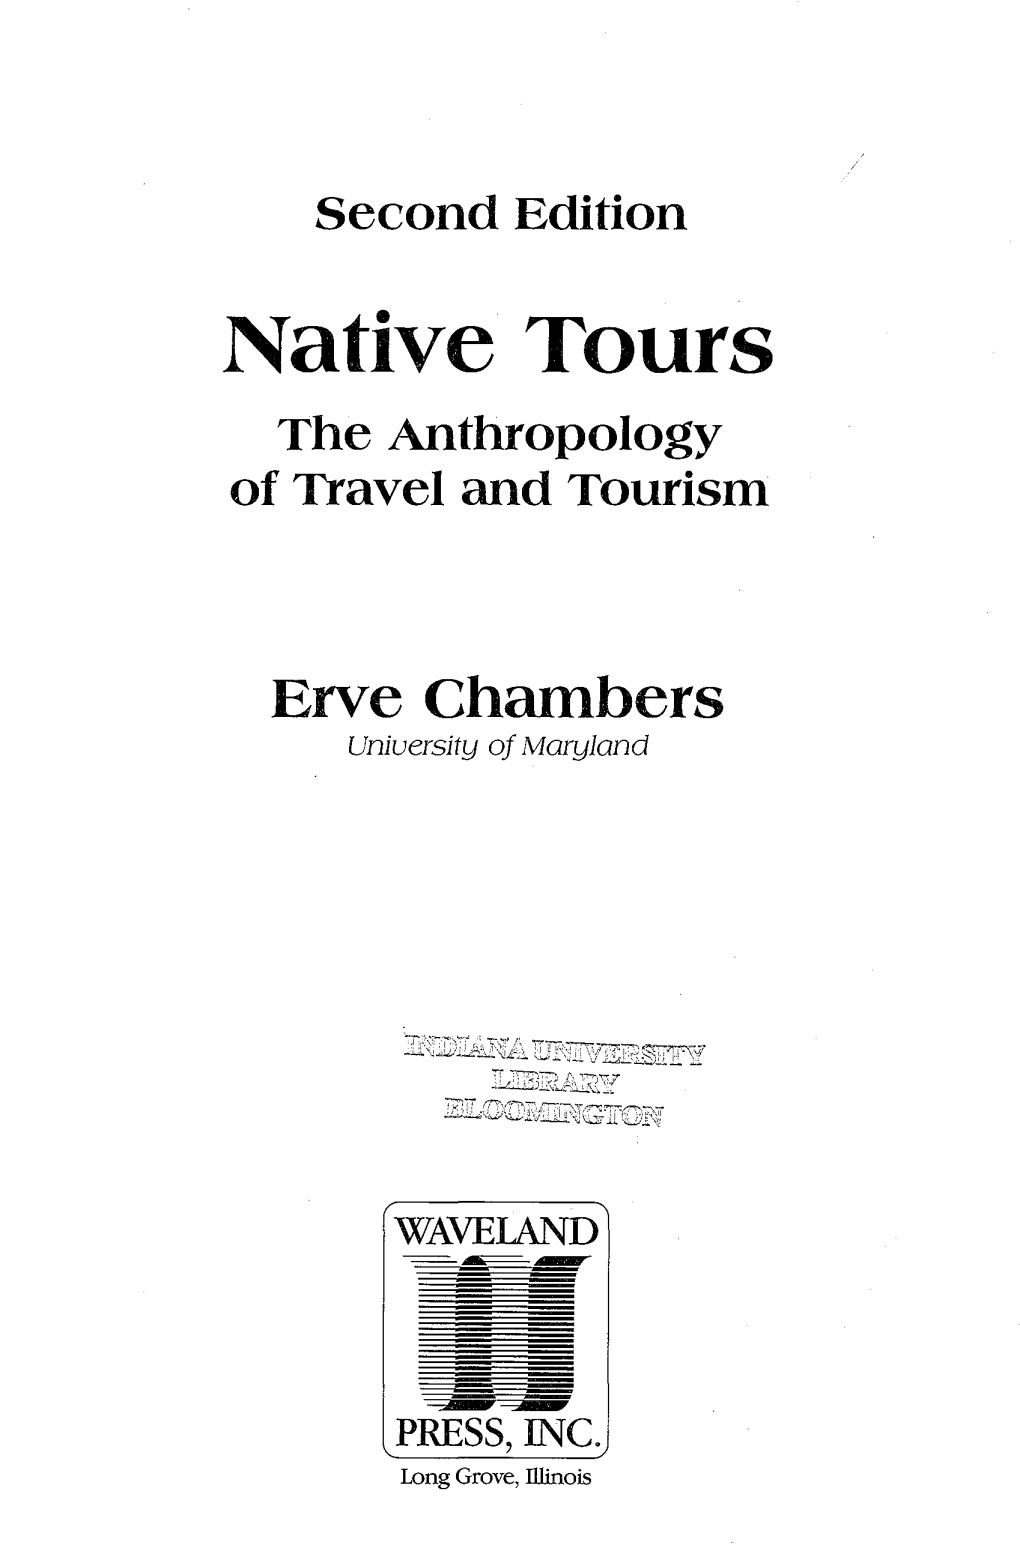 Native Tours: the Anthropology of Travel and Tourism by Erve Chambers to My Wife, Ratchadawan, and Our Daughters, Suwan and Anchalee